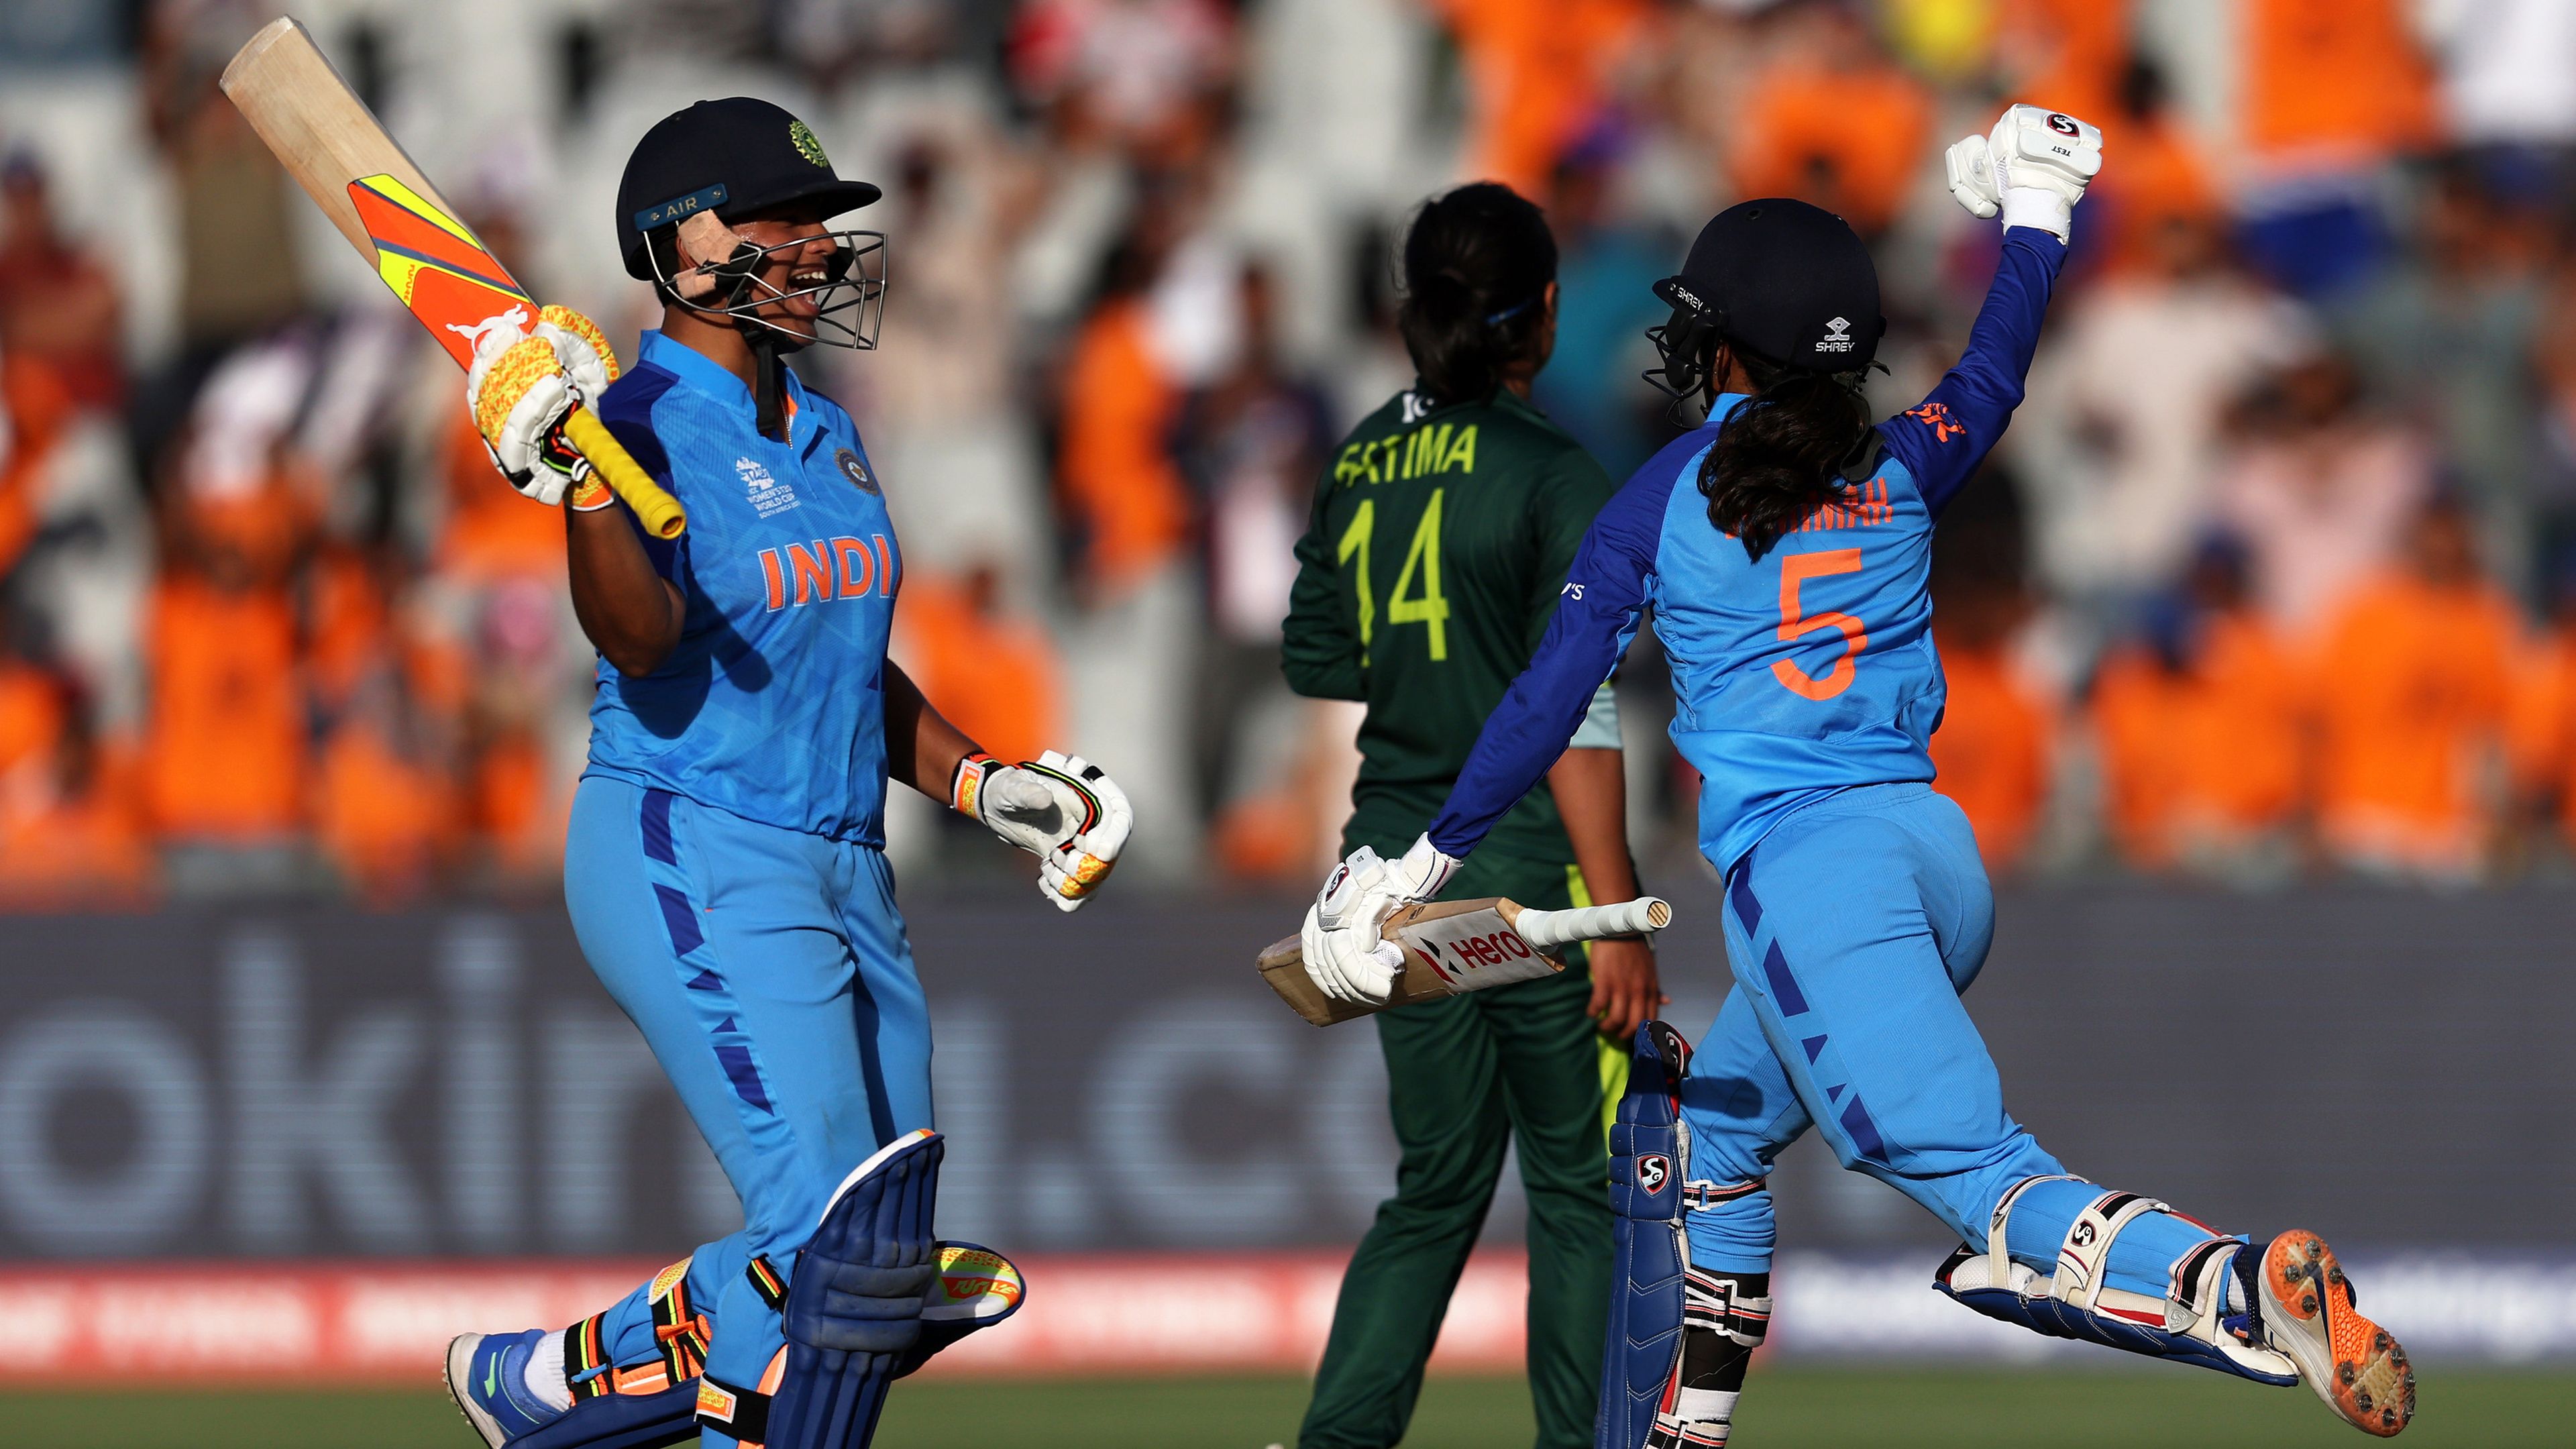 Amazing 42-run explosion propels India to victory in one of the greatest chases in women's T20 history